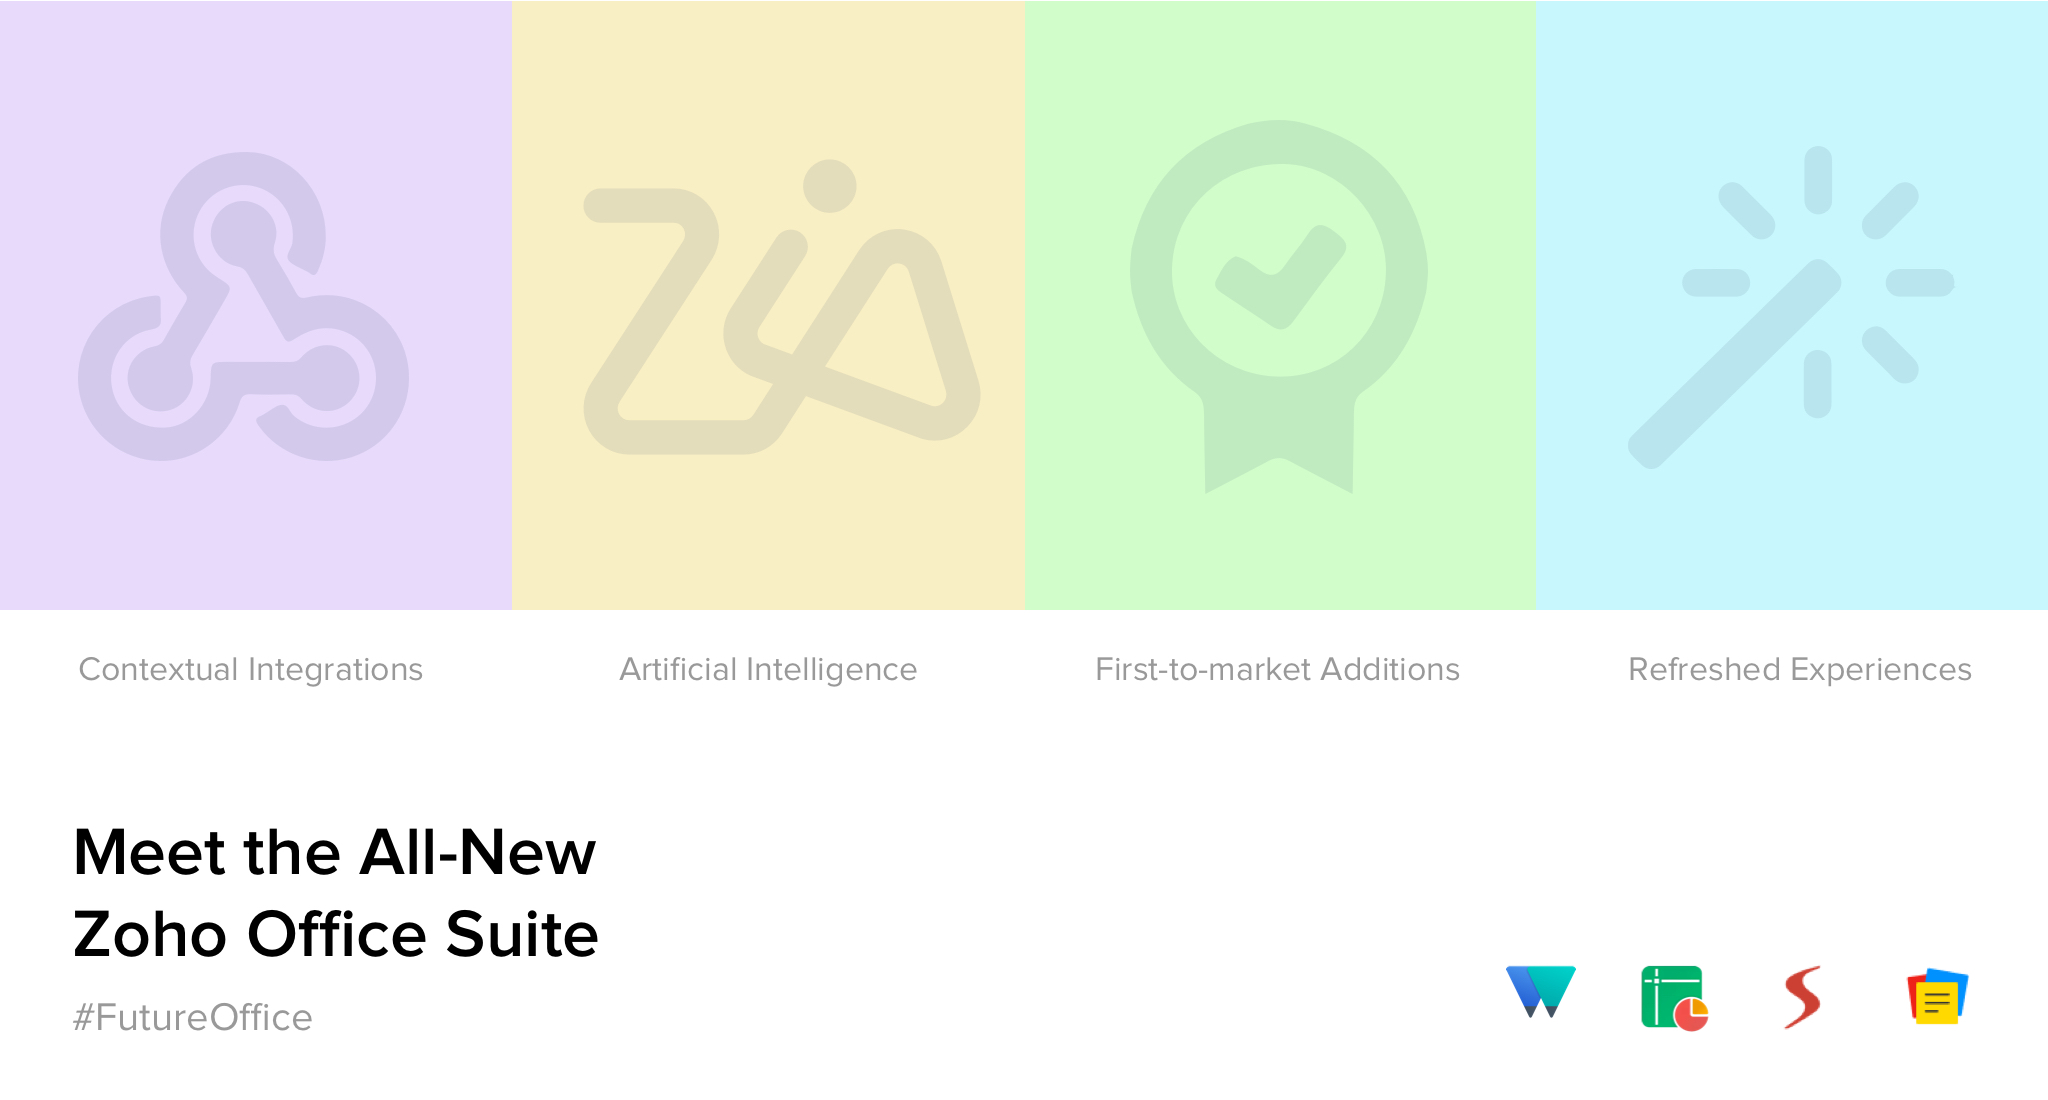 Setting the stage for the future of work—announcing the all-new Zoho Office Suite.